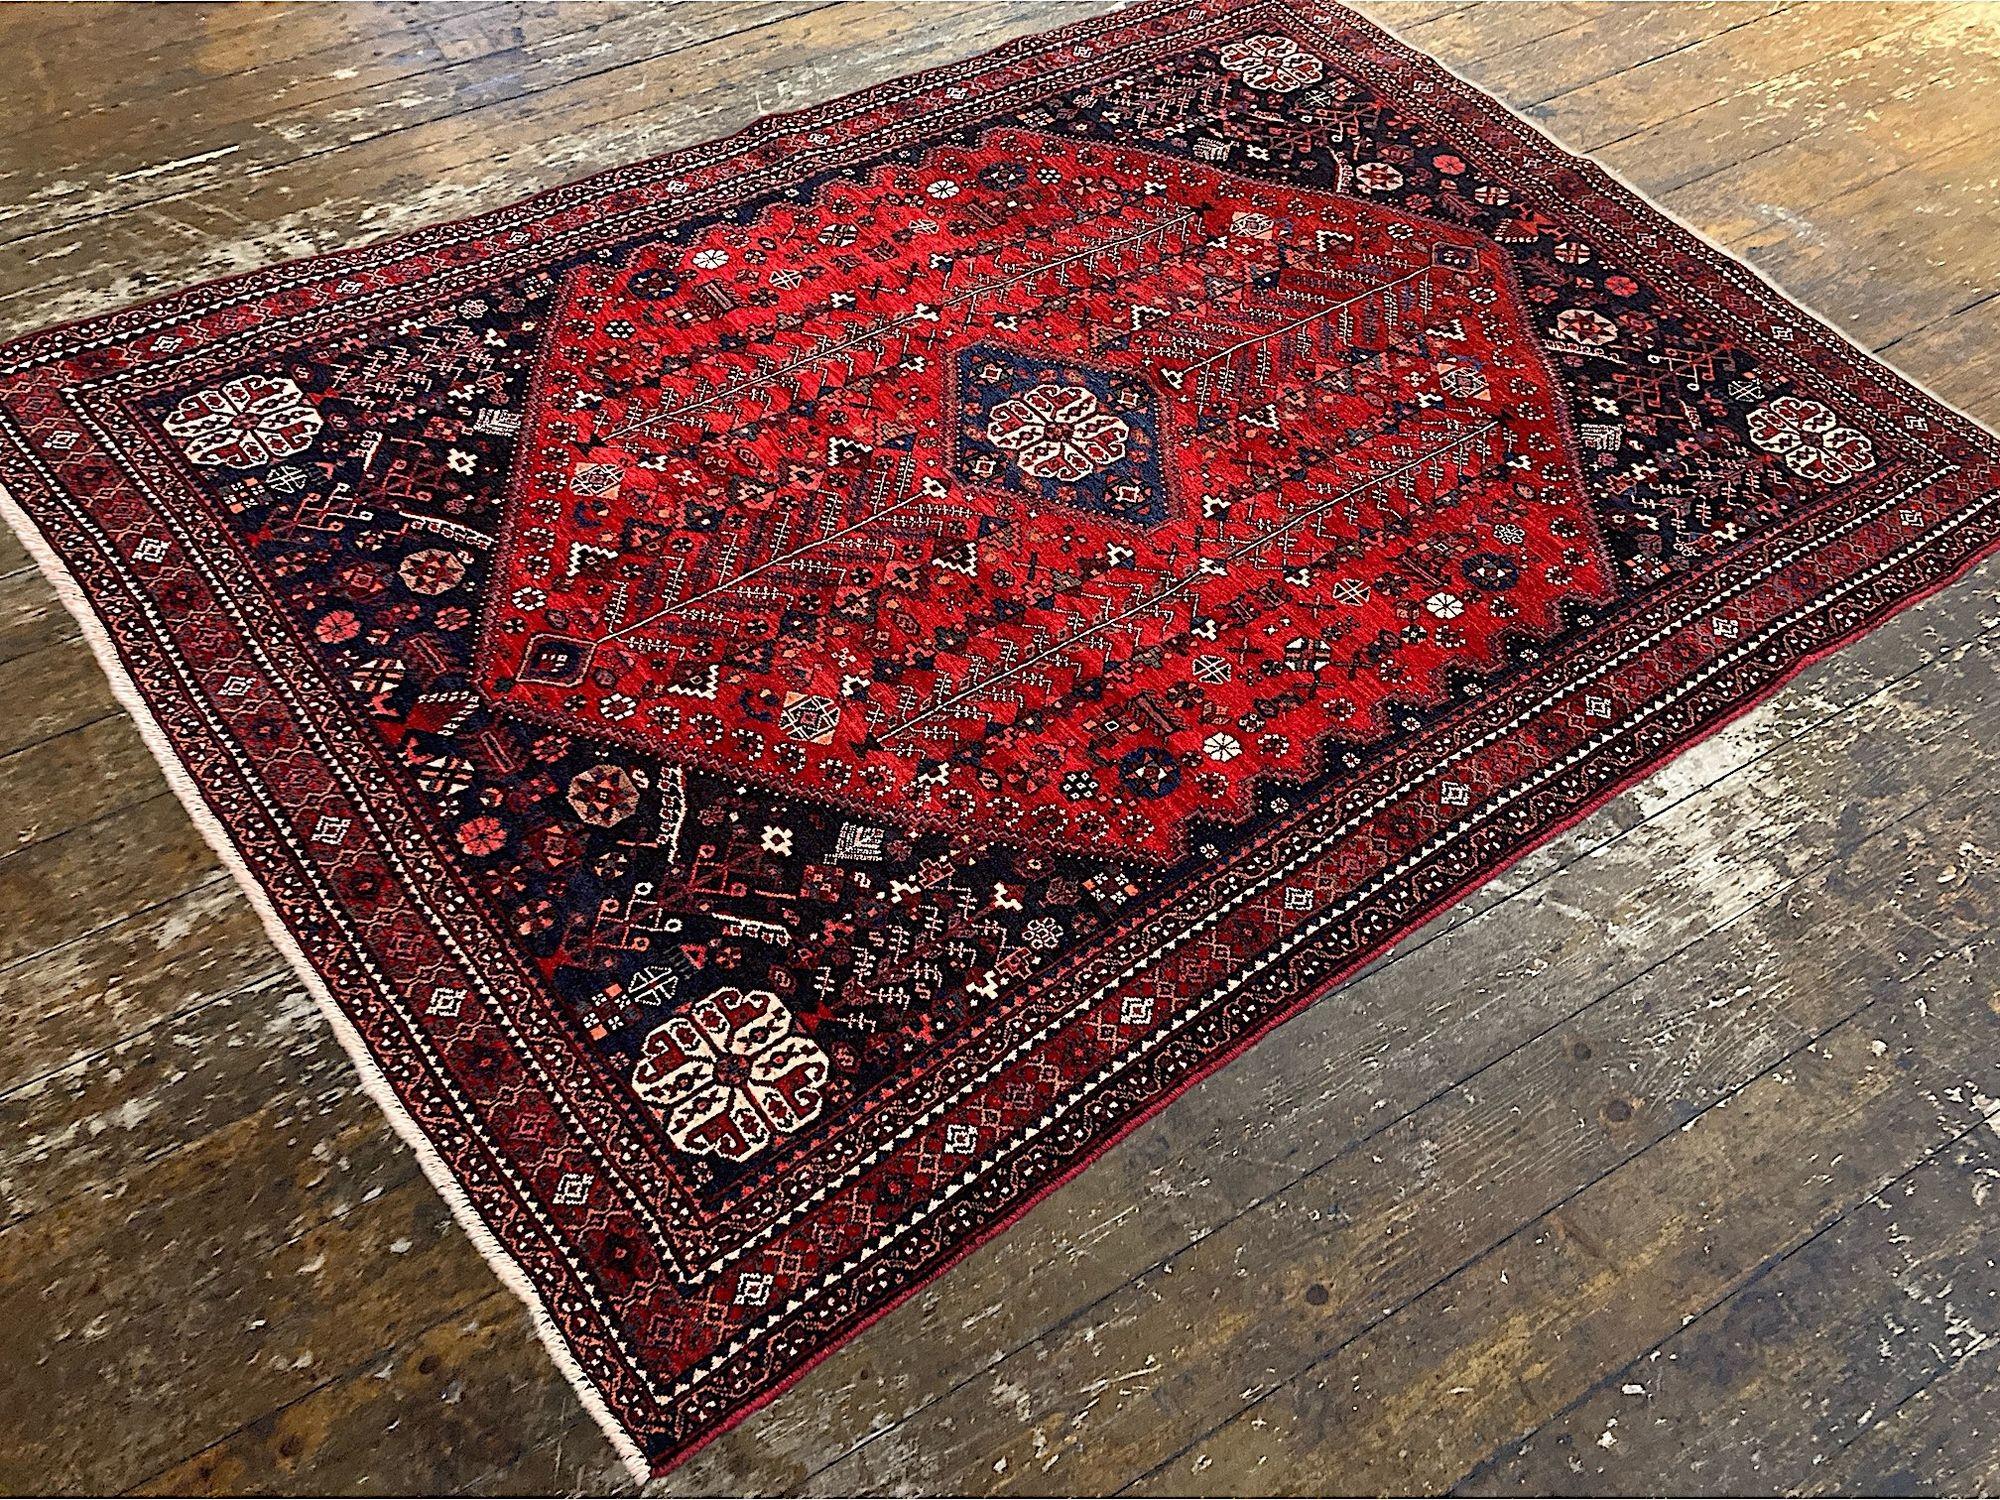 Wool Antique Abadeh Rug 2.05m x 1.43m